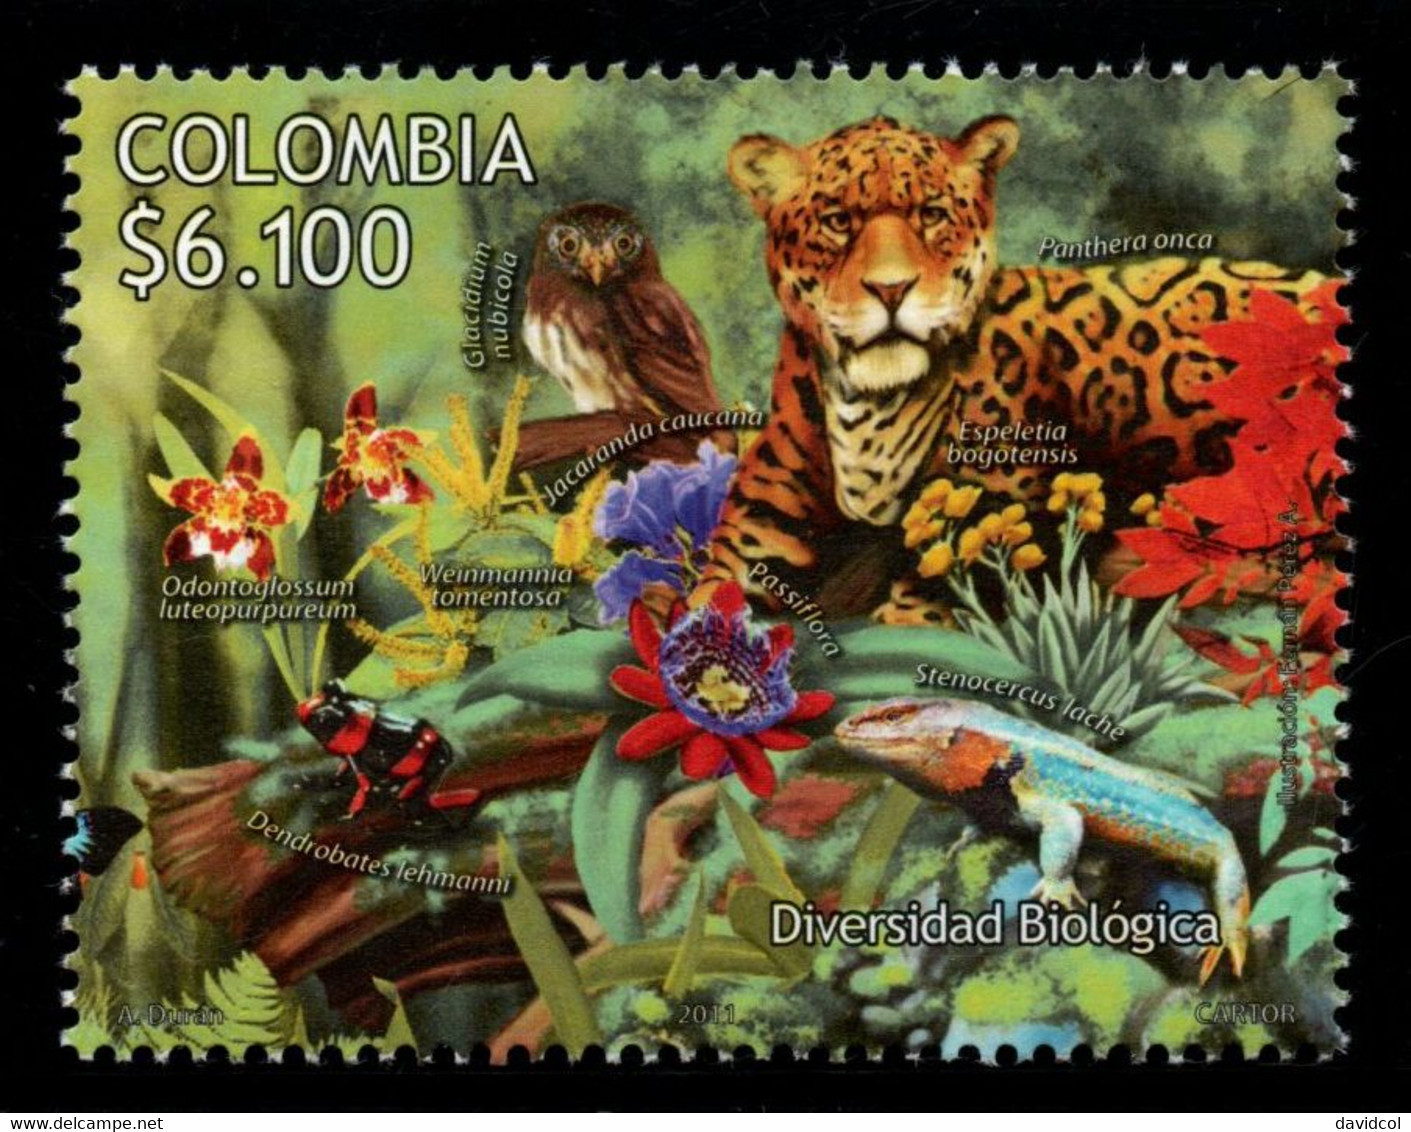 04A-KOLUMBIEN - 2011 -MNH - ORCHIDS, BEAR, JAGUAR,INSECTS, FISH. BIODIVERSITY IN COLOMBIA - Colombie